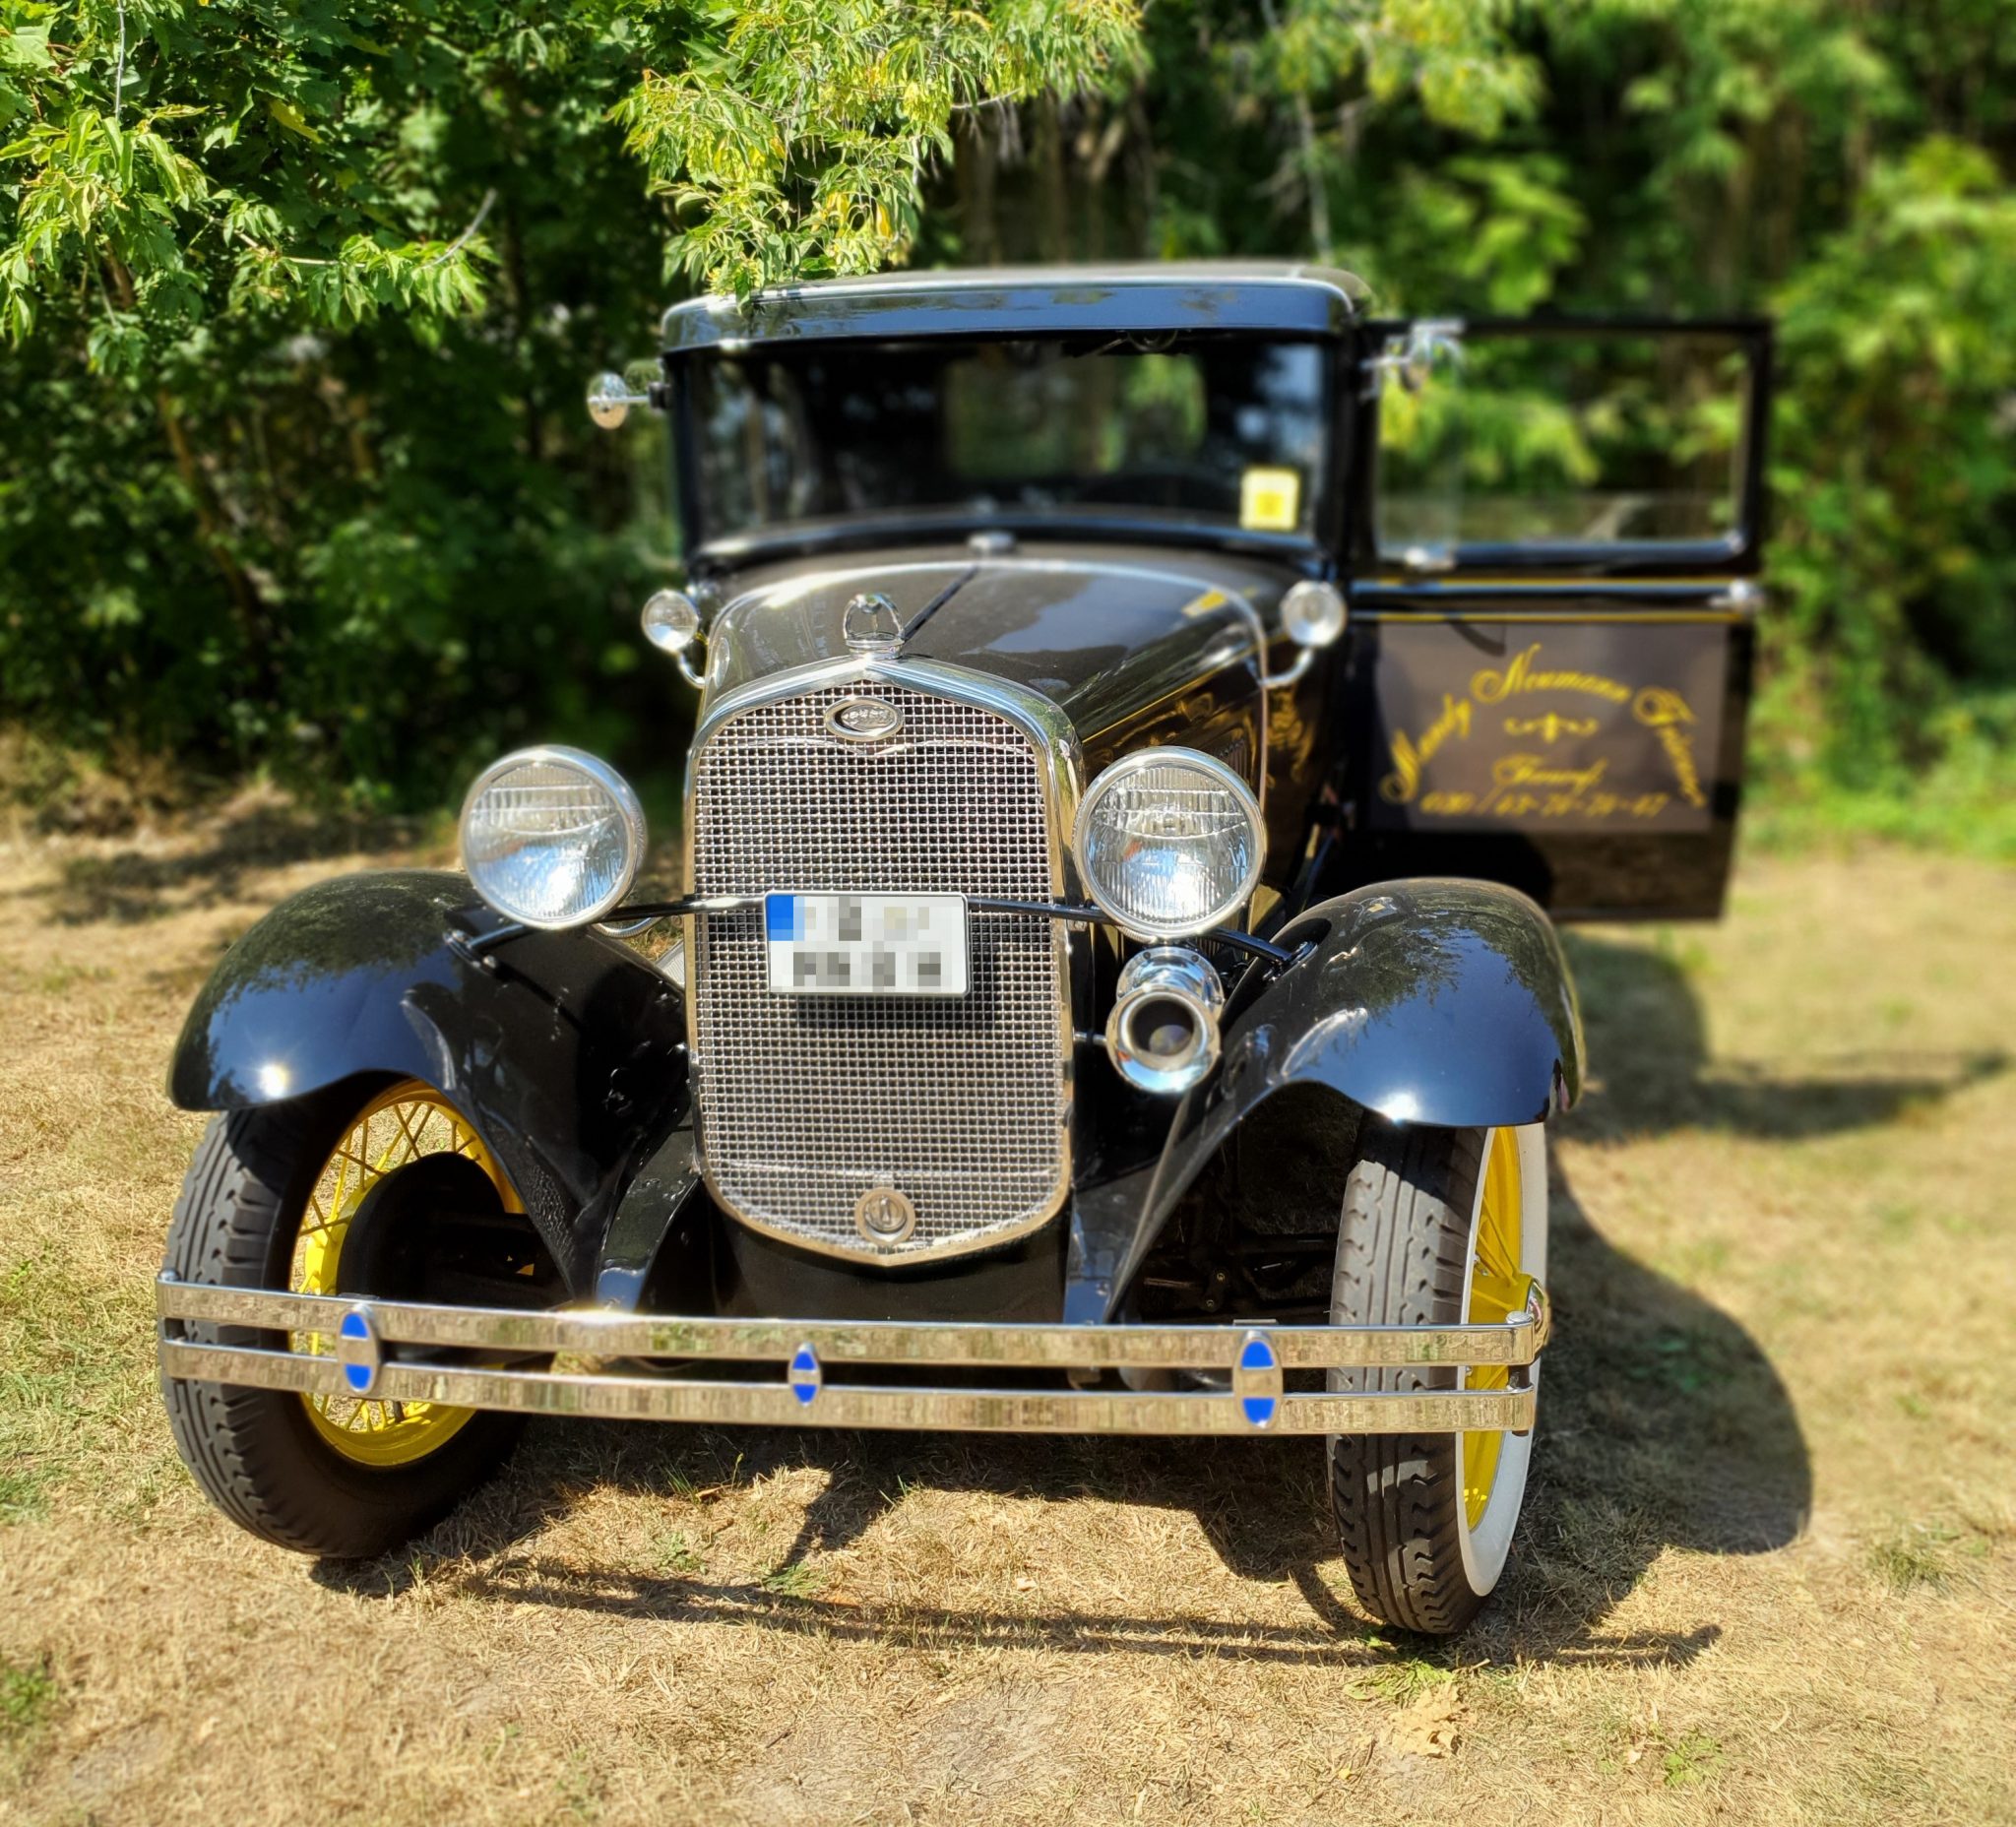 Vehicles II (oldtimers) at the Retro Picnic 2020